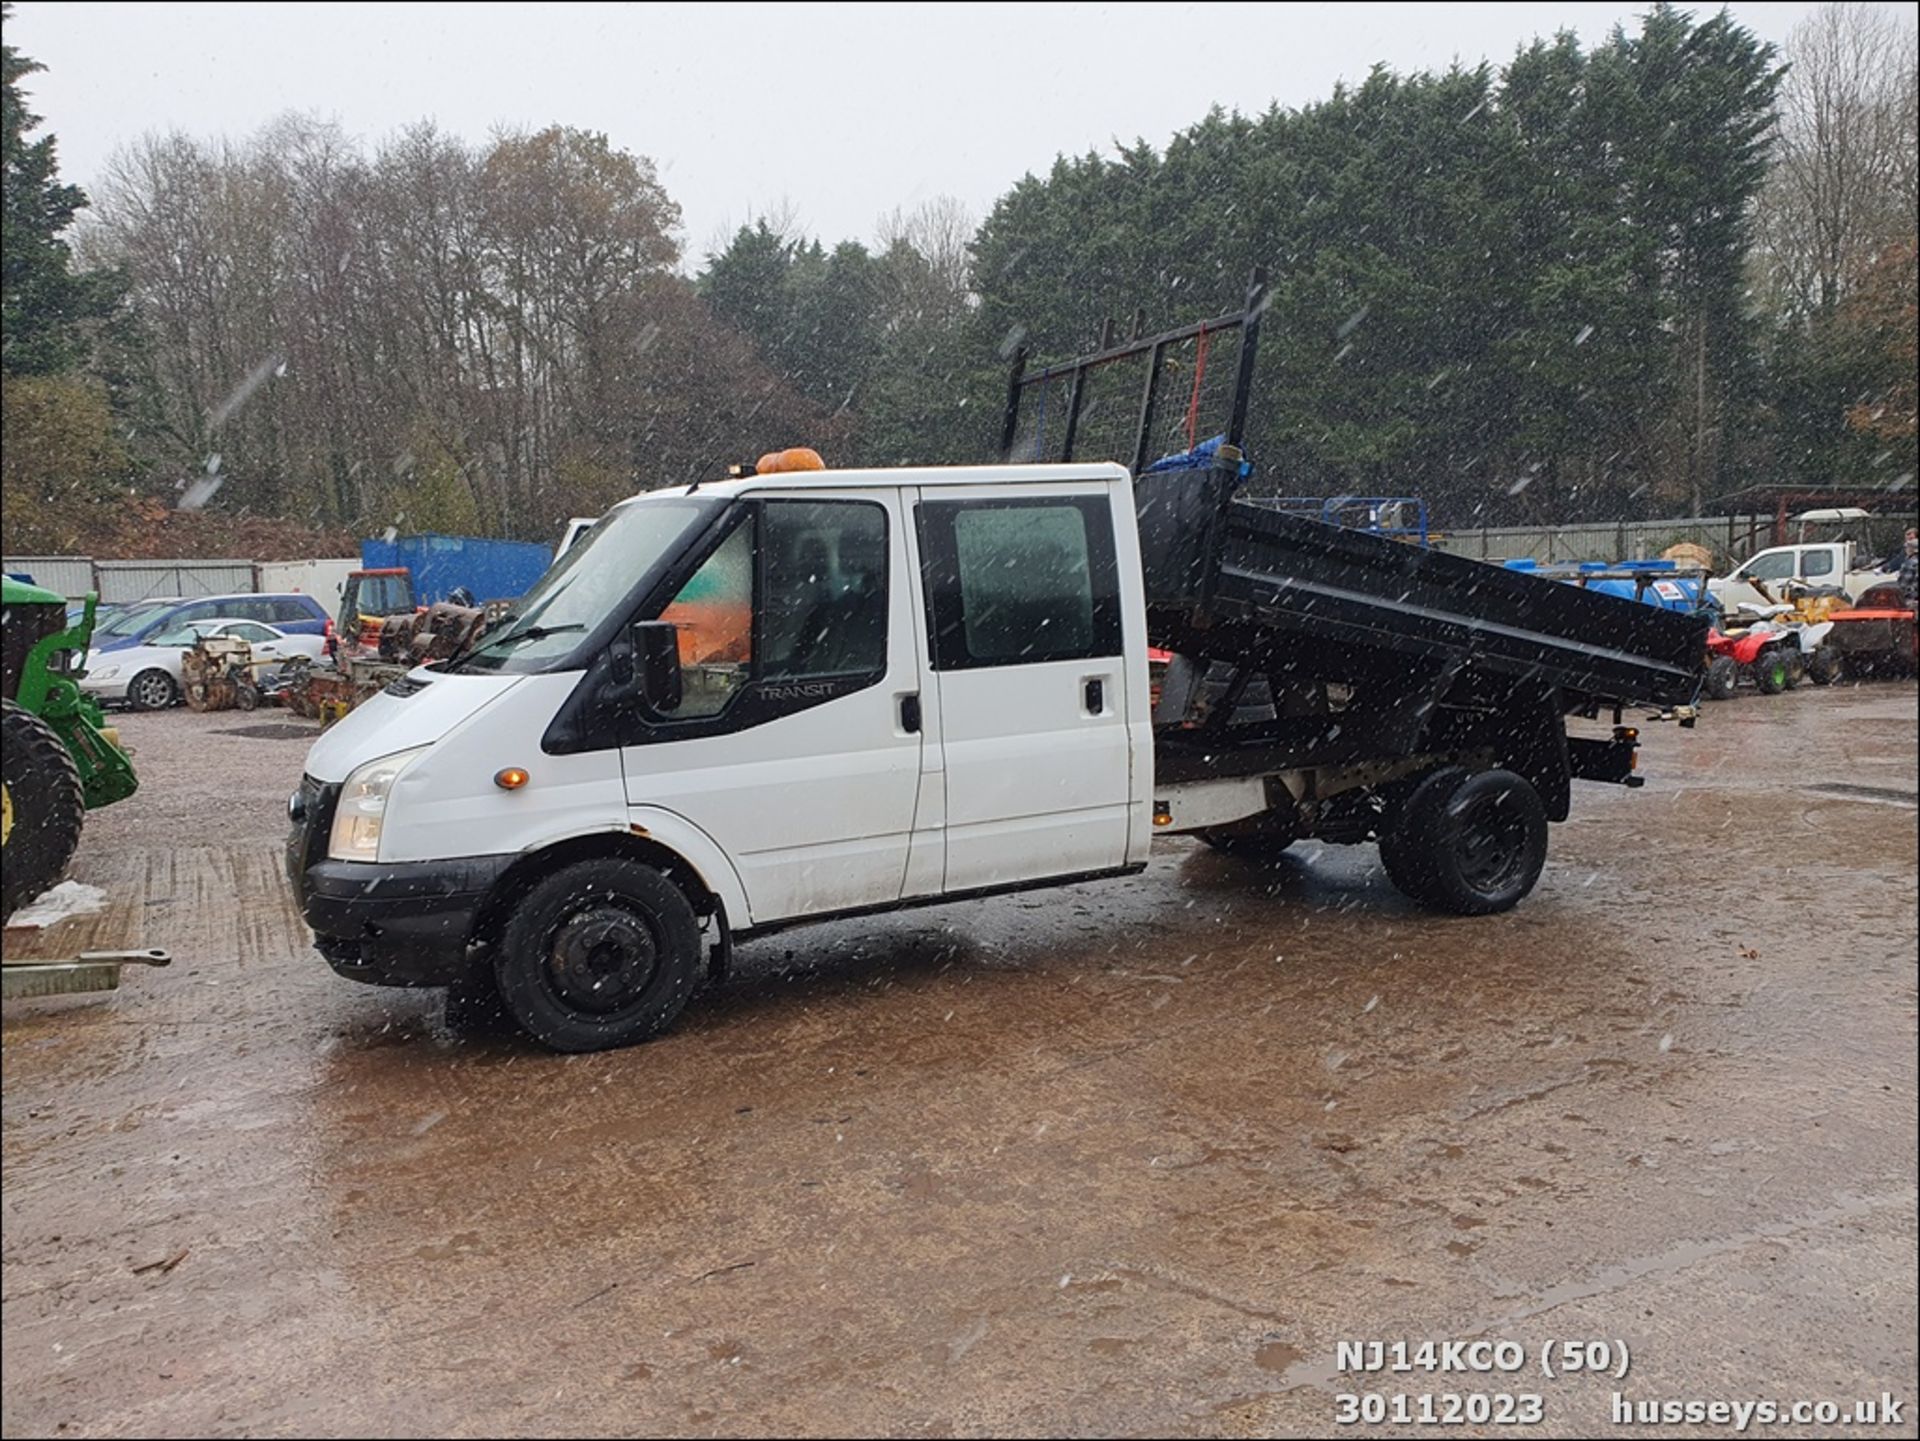 14/14 FORD TRANSIT 100 T350 RWD - 2198cc 4dr Tipper (White, 75k) - Image 51 of 51